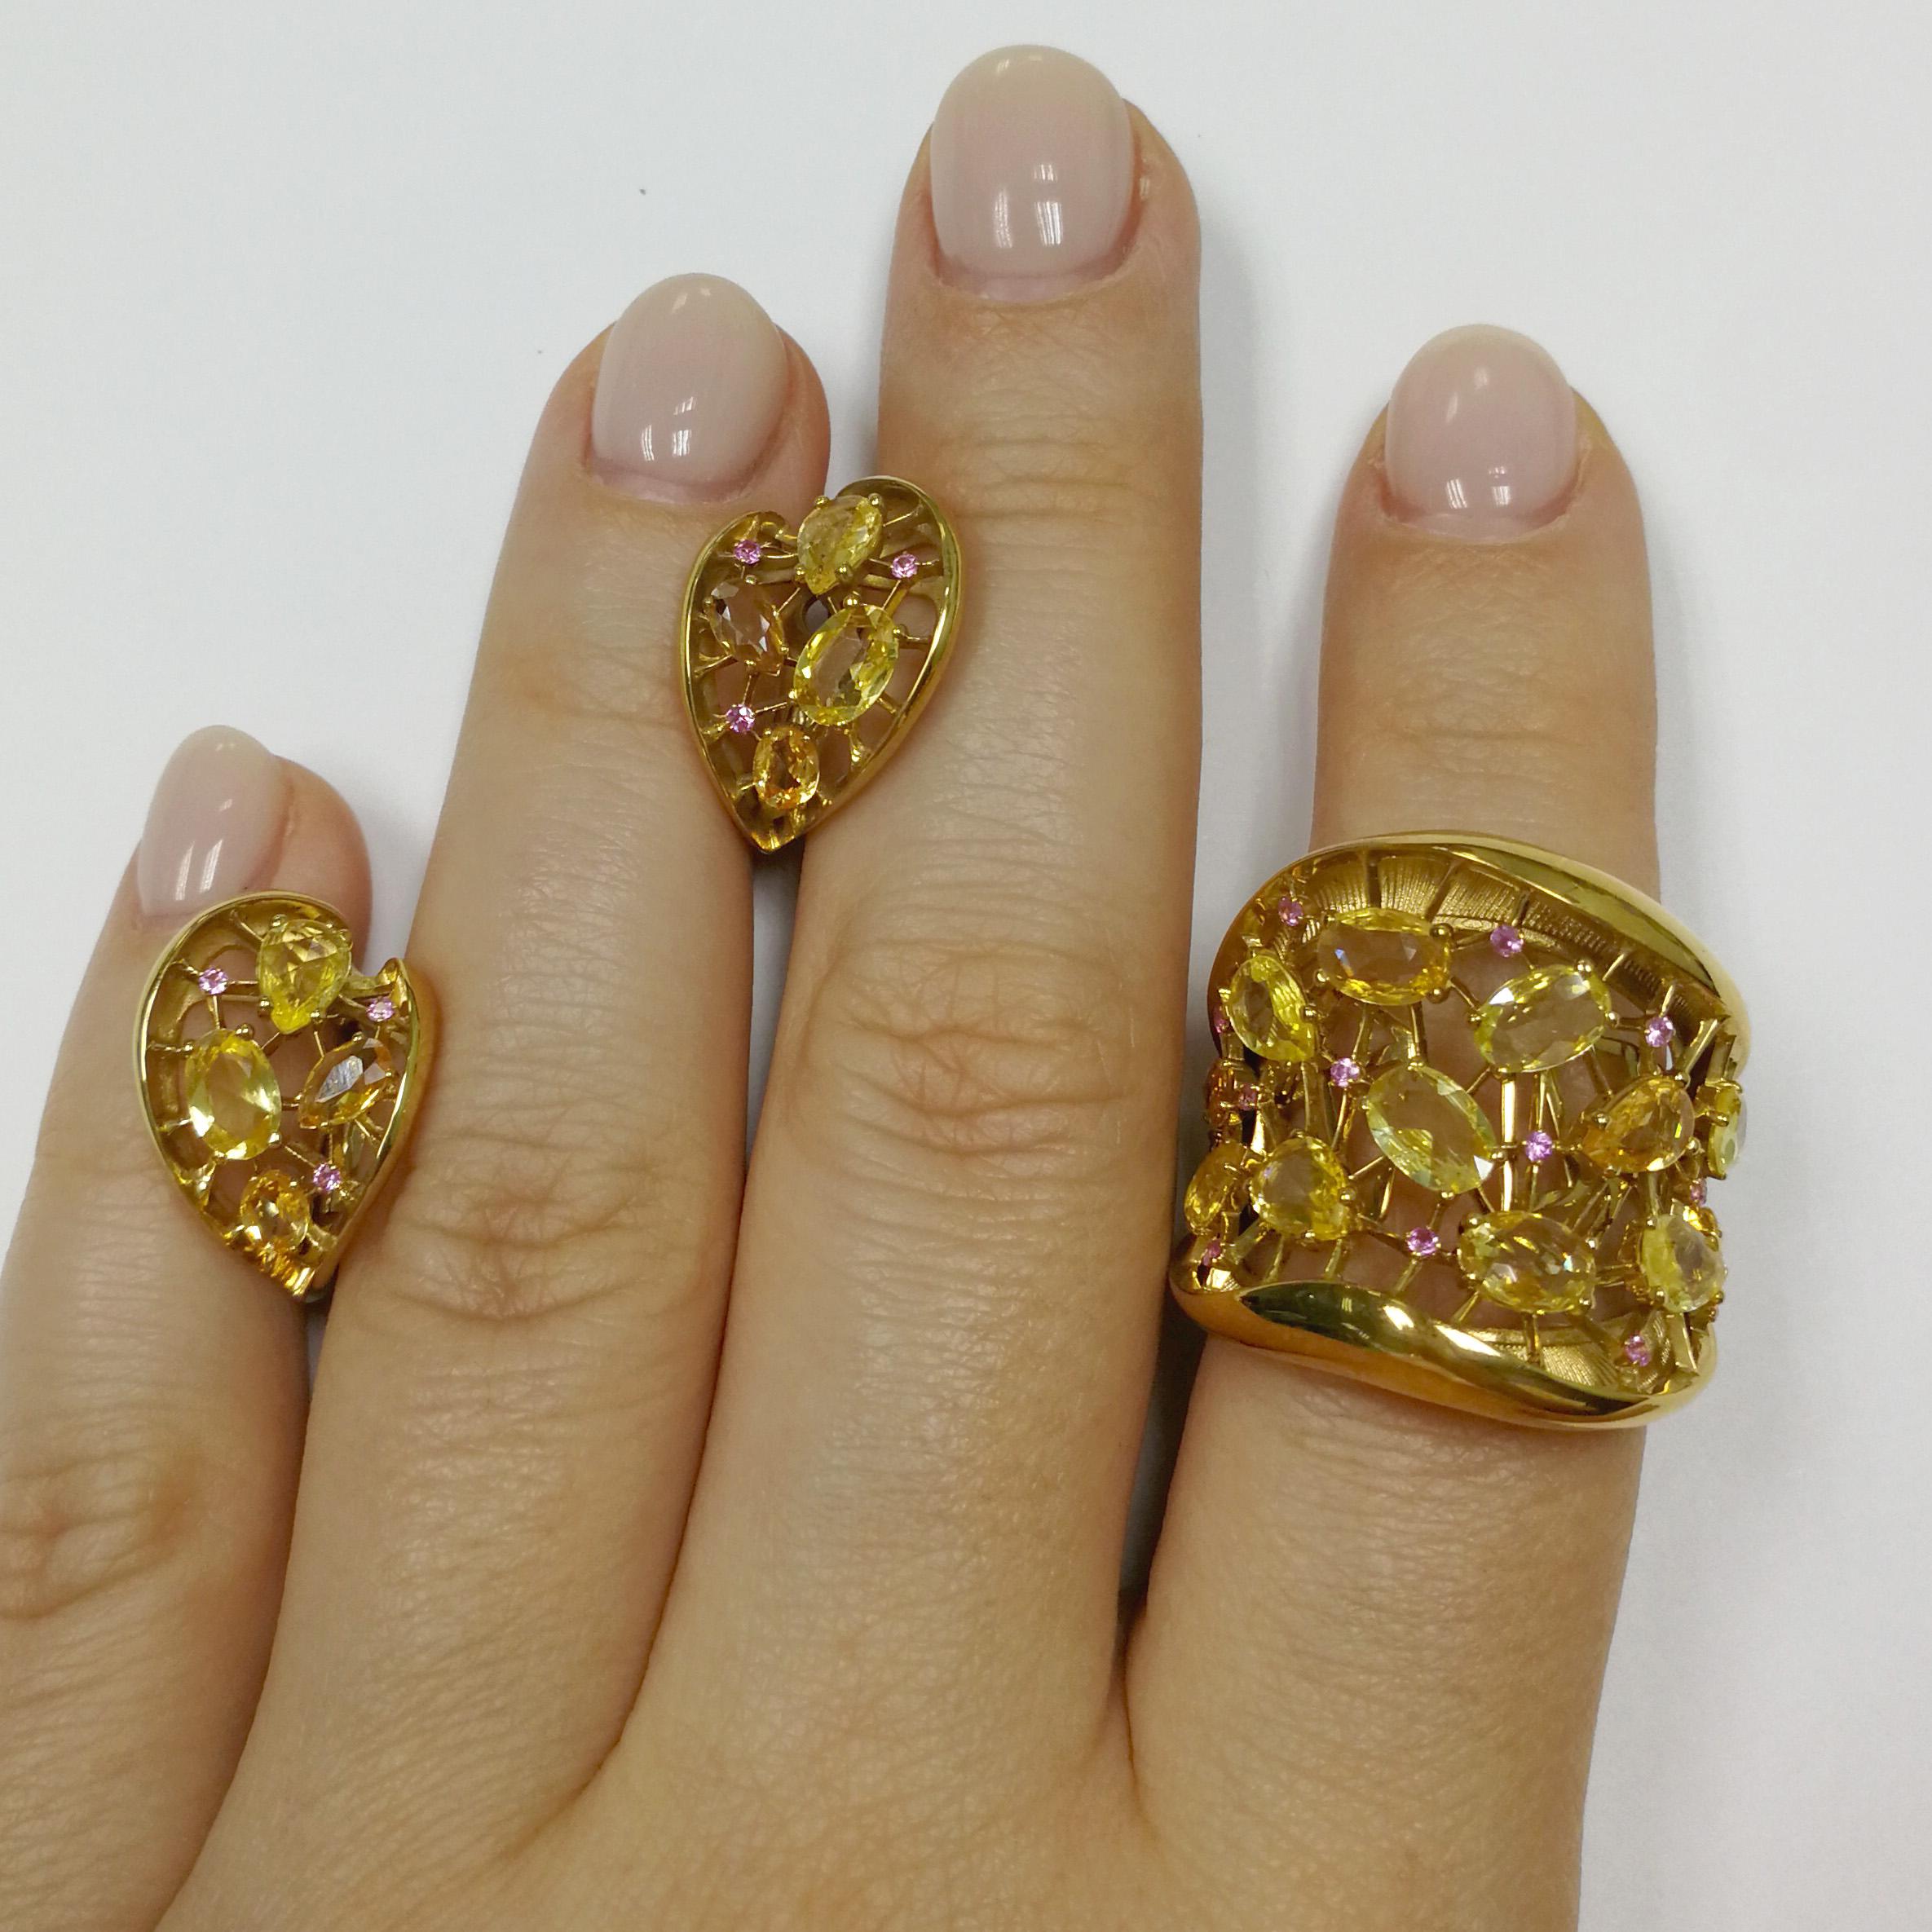 Yellow and Pink Sapphires 18 Karat Yellow Gold Splash Suite
As a sunbeam from darkness bursts into your hearts, this bright Suite! The middle of the Ring and Earrings, made of 18 Karat Yellow Gold, resembles a plexus of thin strings, like a small